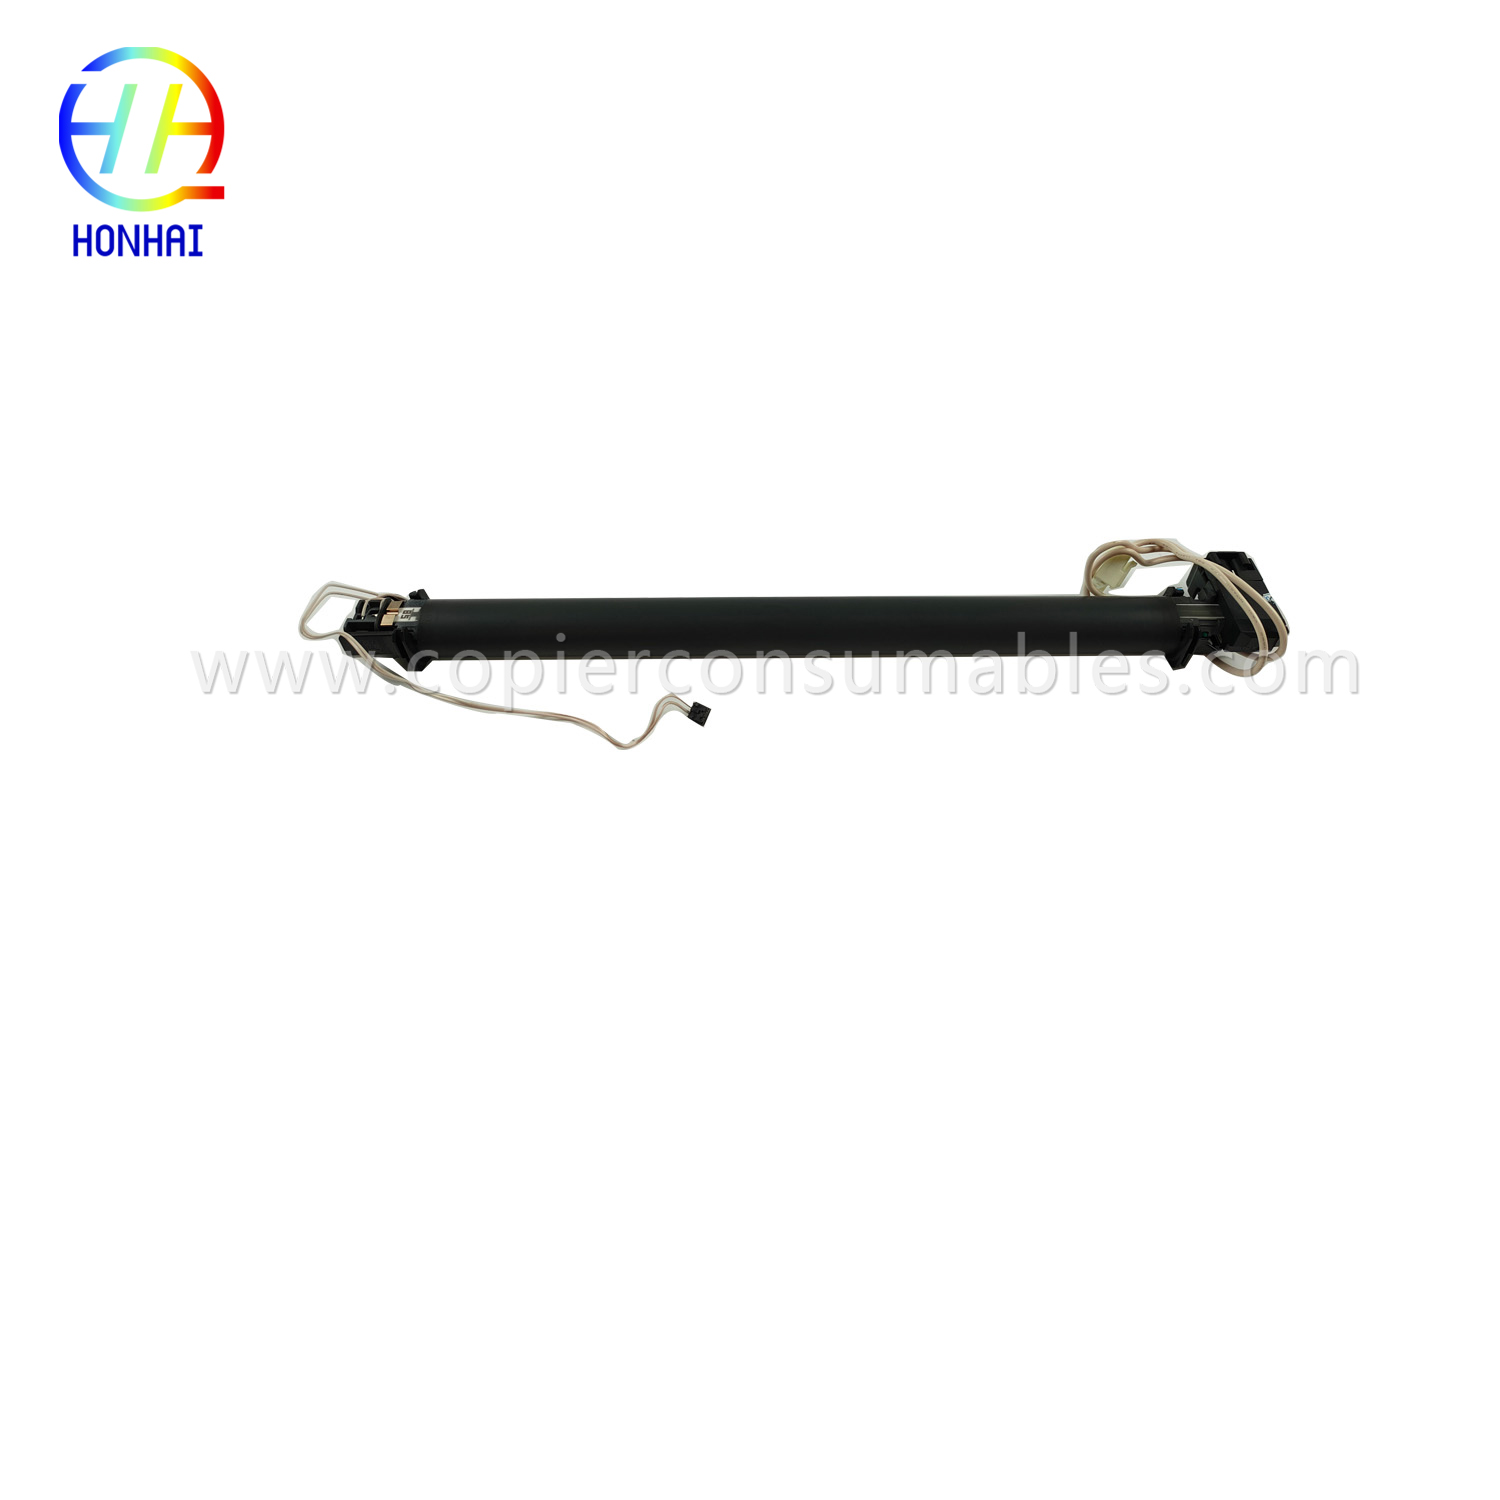 Fixing film assembly for HP M203 M227 M230 (2).jpg-1 拷贝